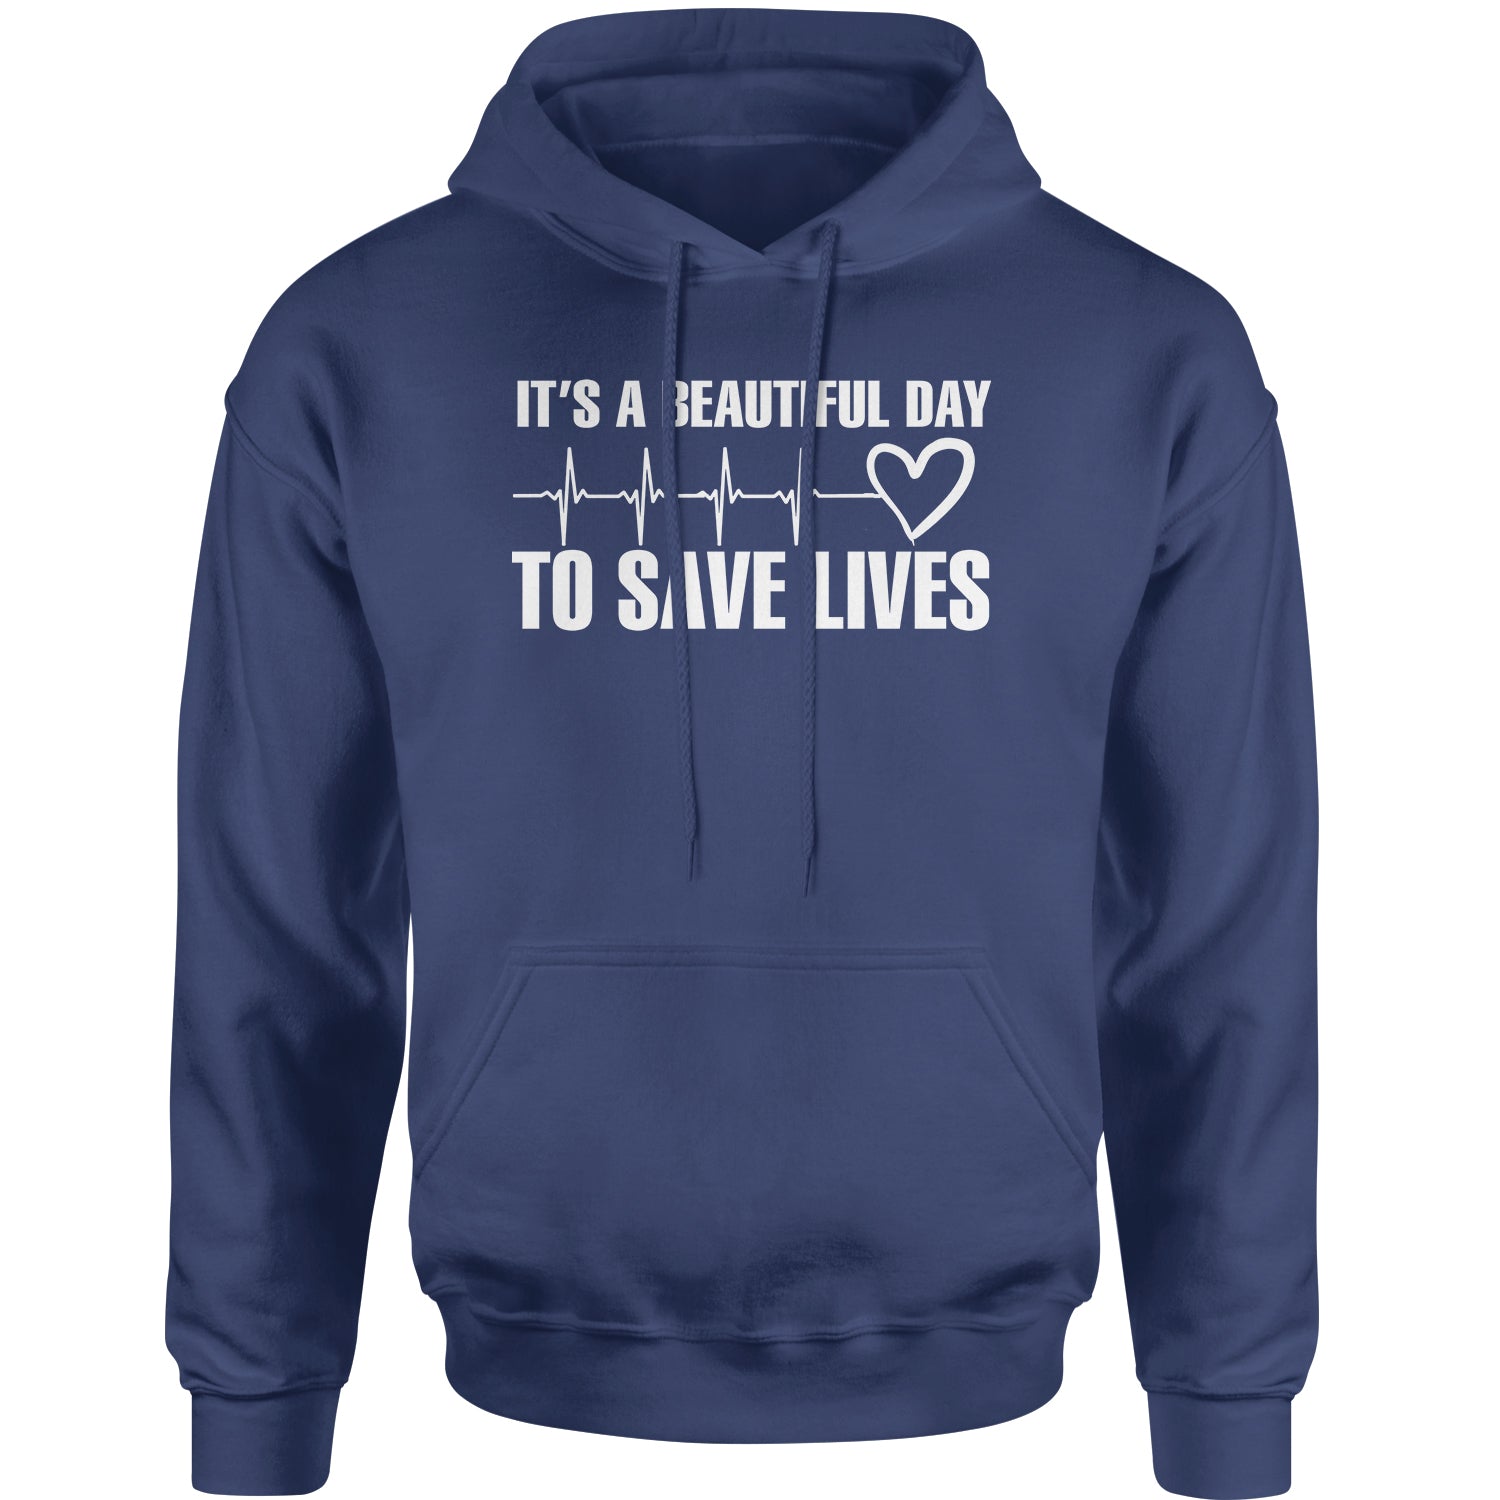 It's A Beautiful Day To Save Lives (White Print) Adult Hoodie Sweatshi